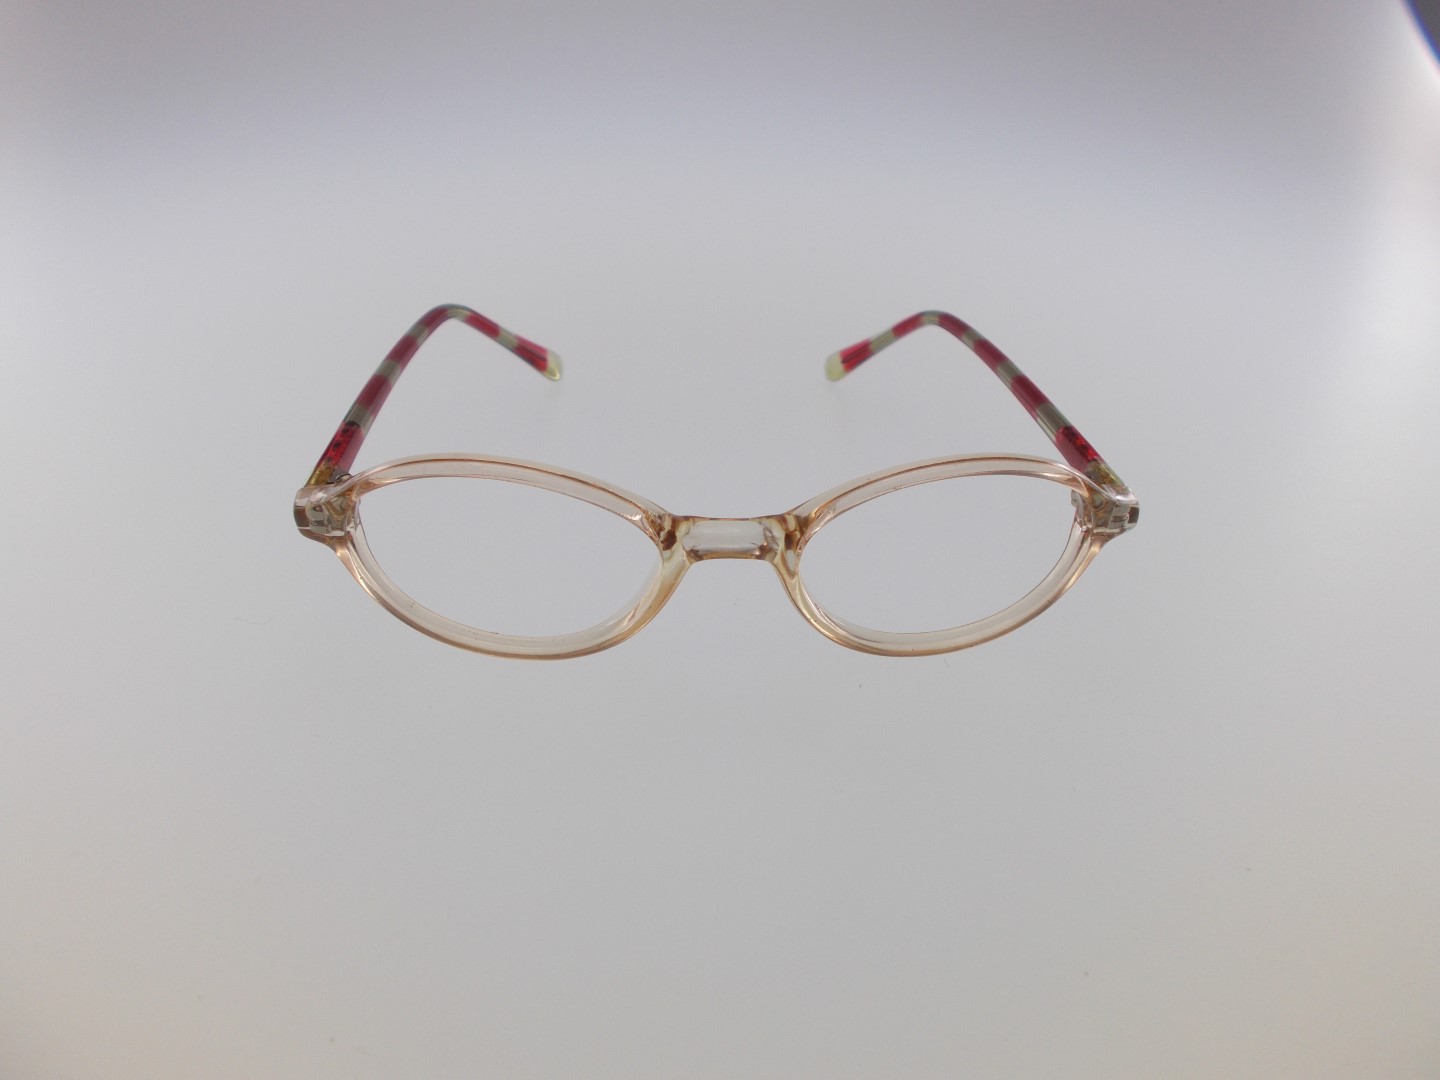 Image of spectacles